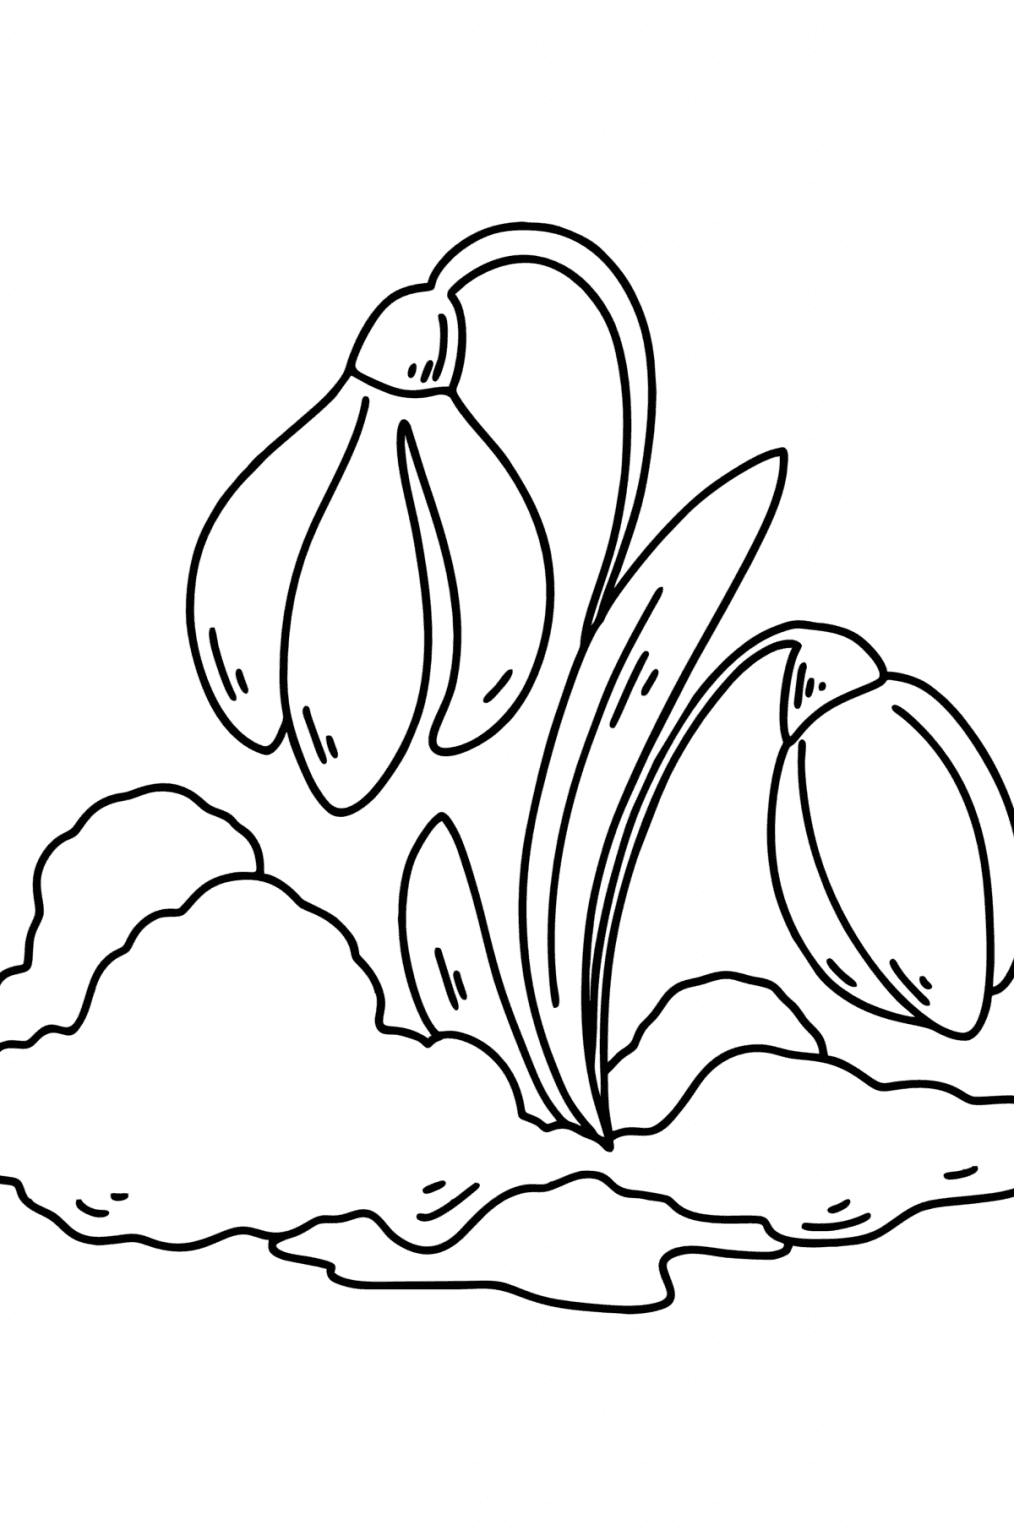 Spring Snowdrops coloring page ♥ Online and Print for Free!